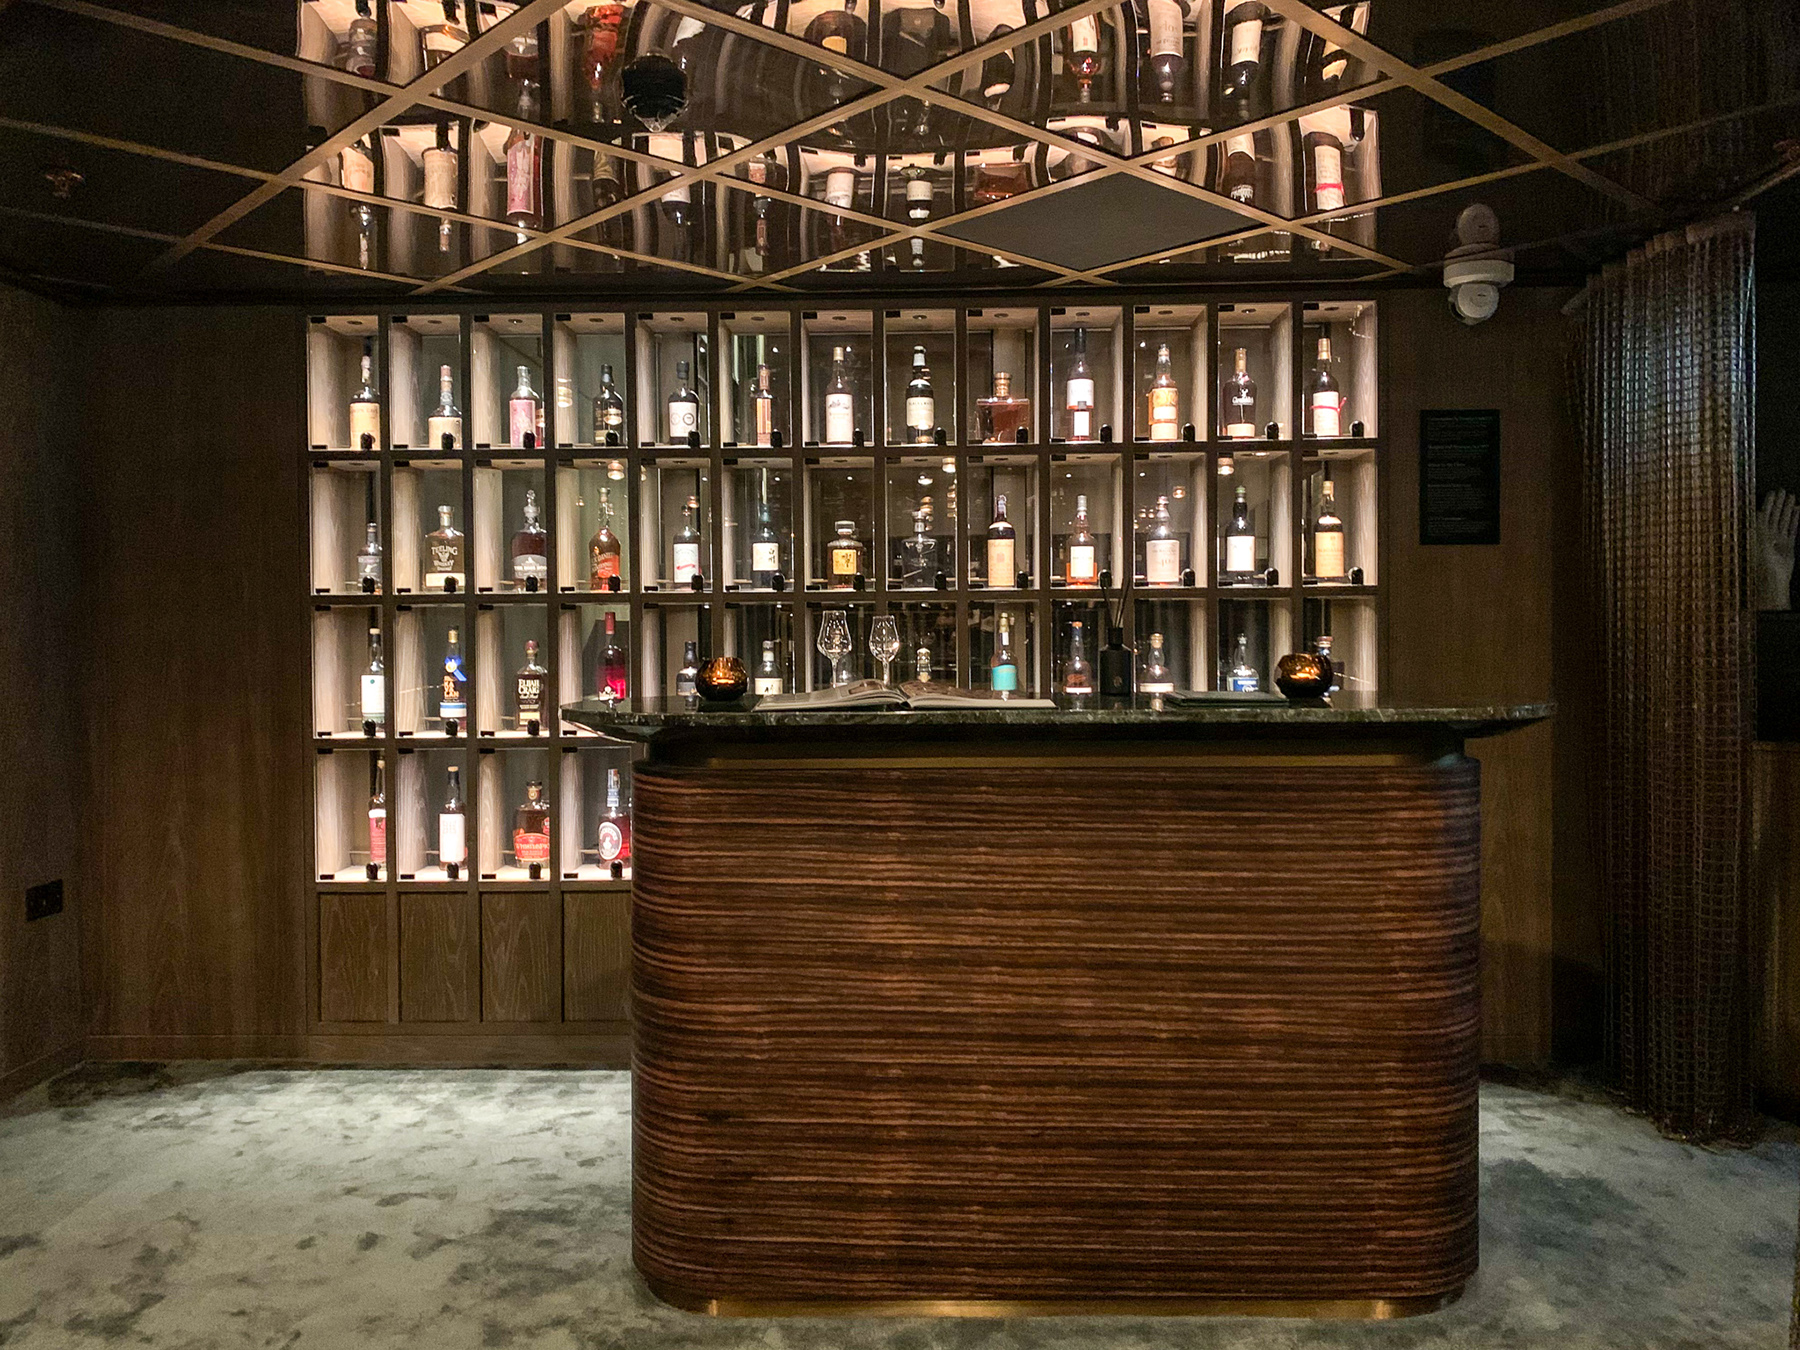 The guests-only "Residence" offers a private whiskey bar with 50+ bottles